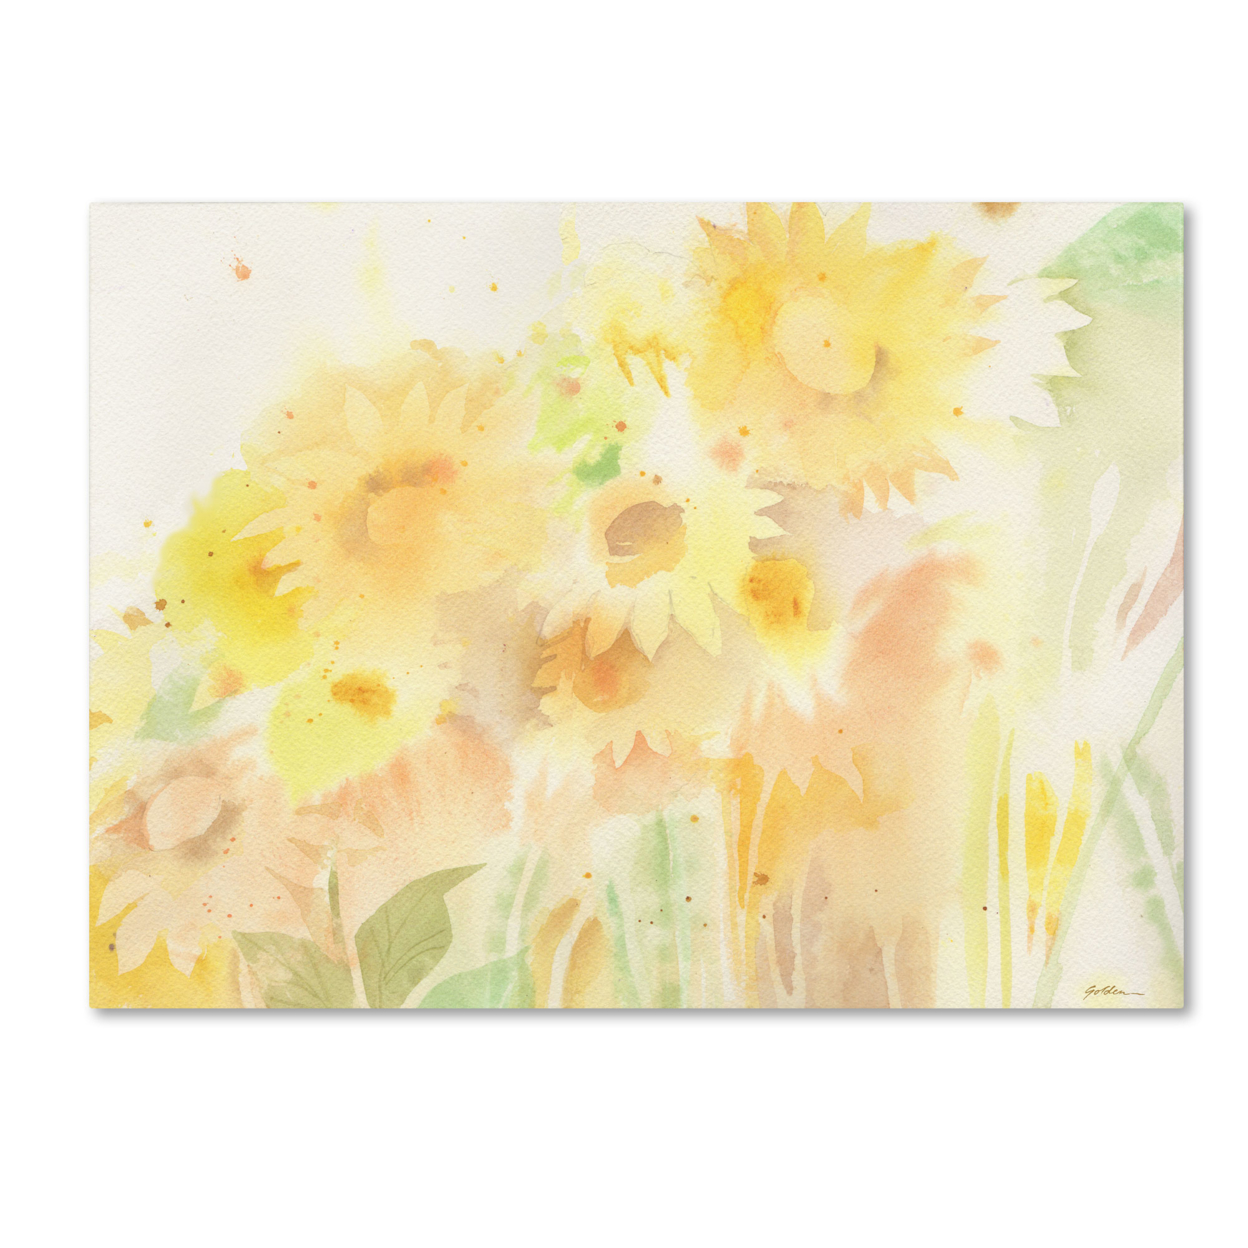 Sheila Golden 'Amid Sunflowers' Canvas Wall Art 35 X 47 Inches